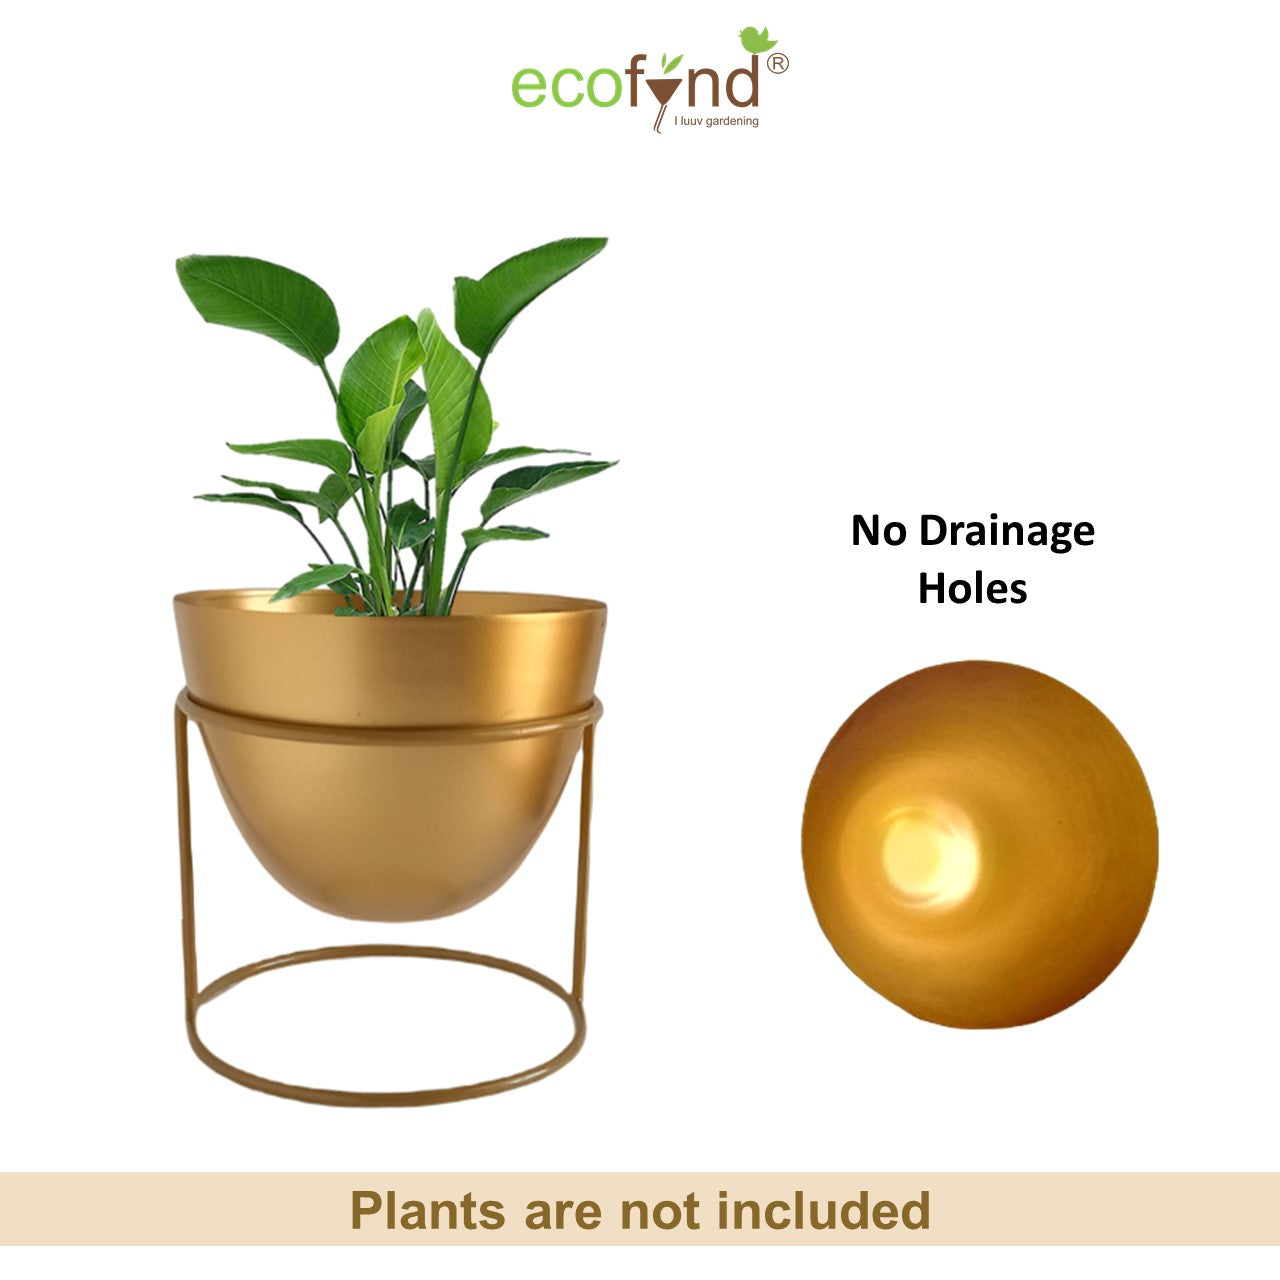 Alle Metal Plant Pot with Stand planter freeshipping - Ecofynd